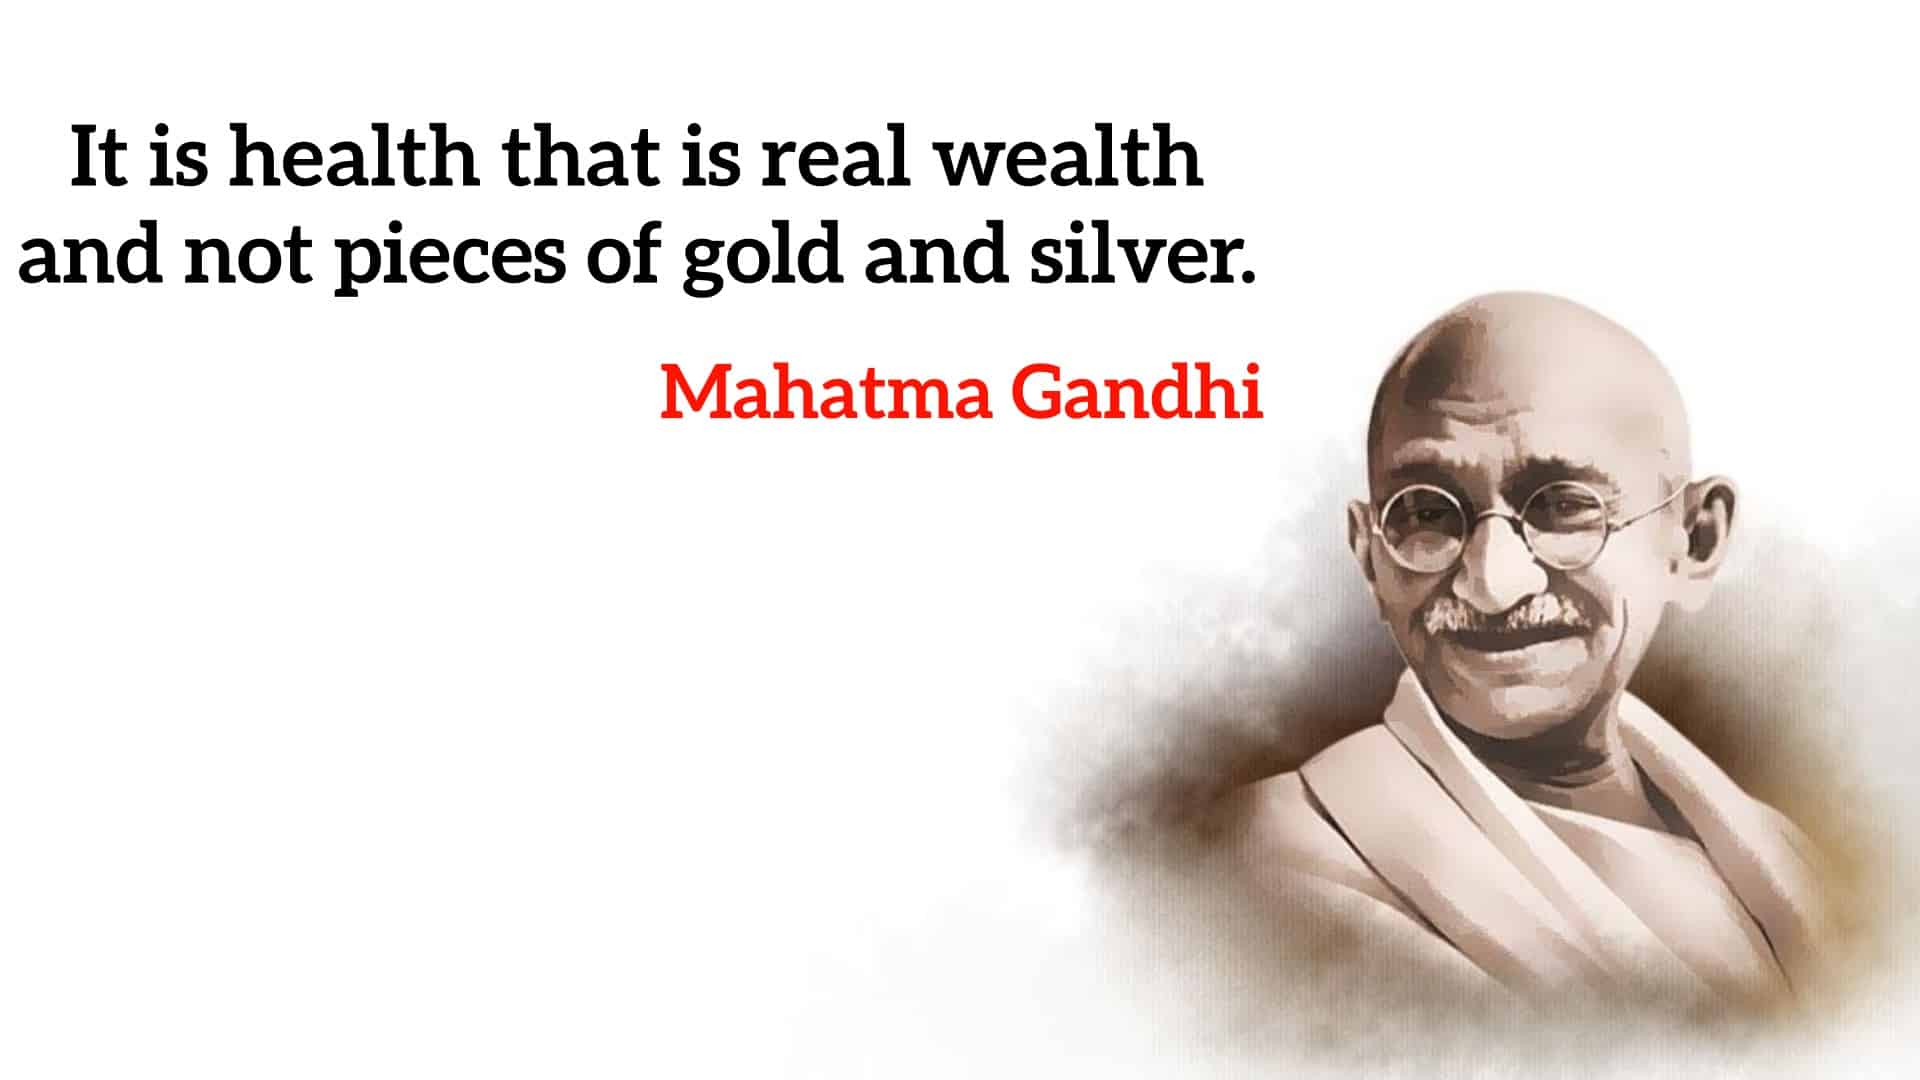 It is health that is real wealth and not pieces of gold and silver.” - Mahatma Gandhi